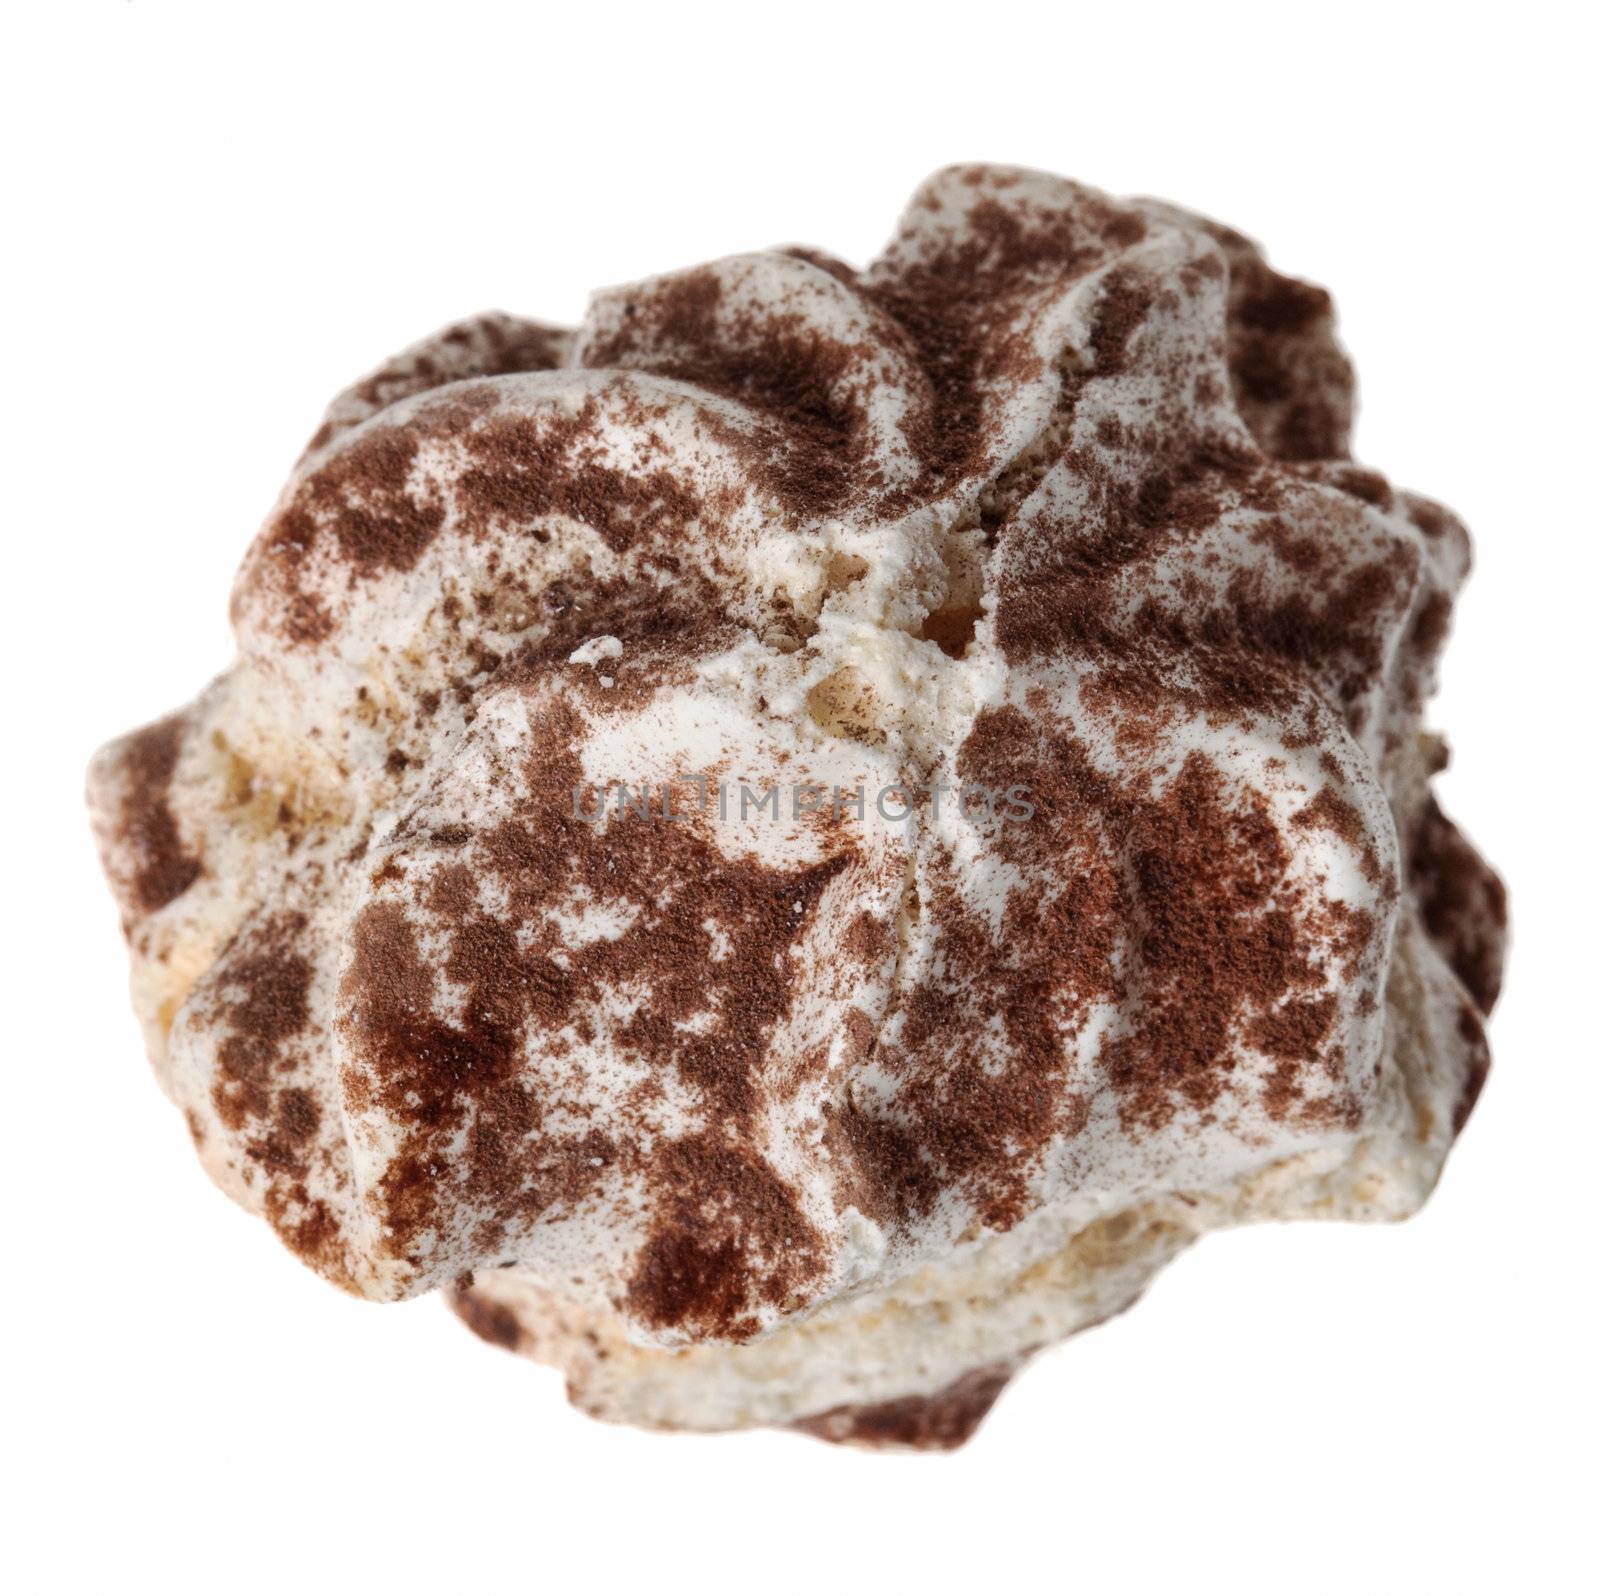 Upper view of a custard cake cover in cocoa powder isolated against a white background.